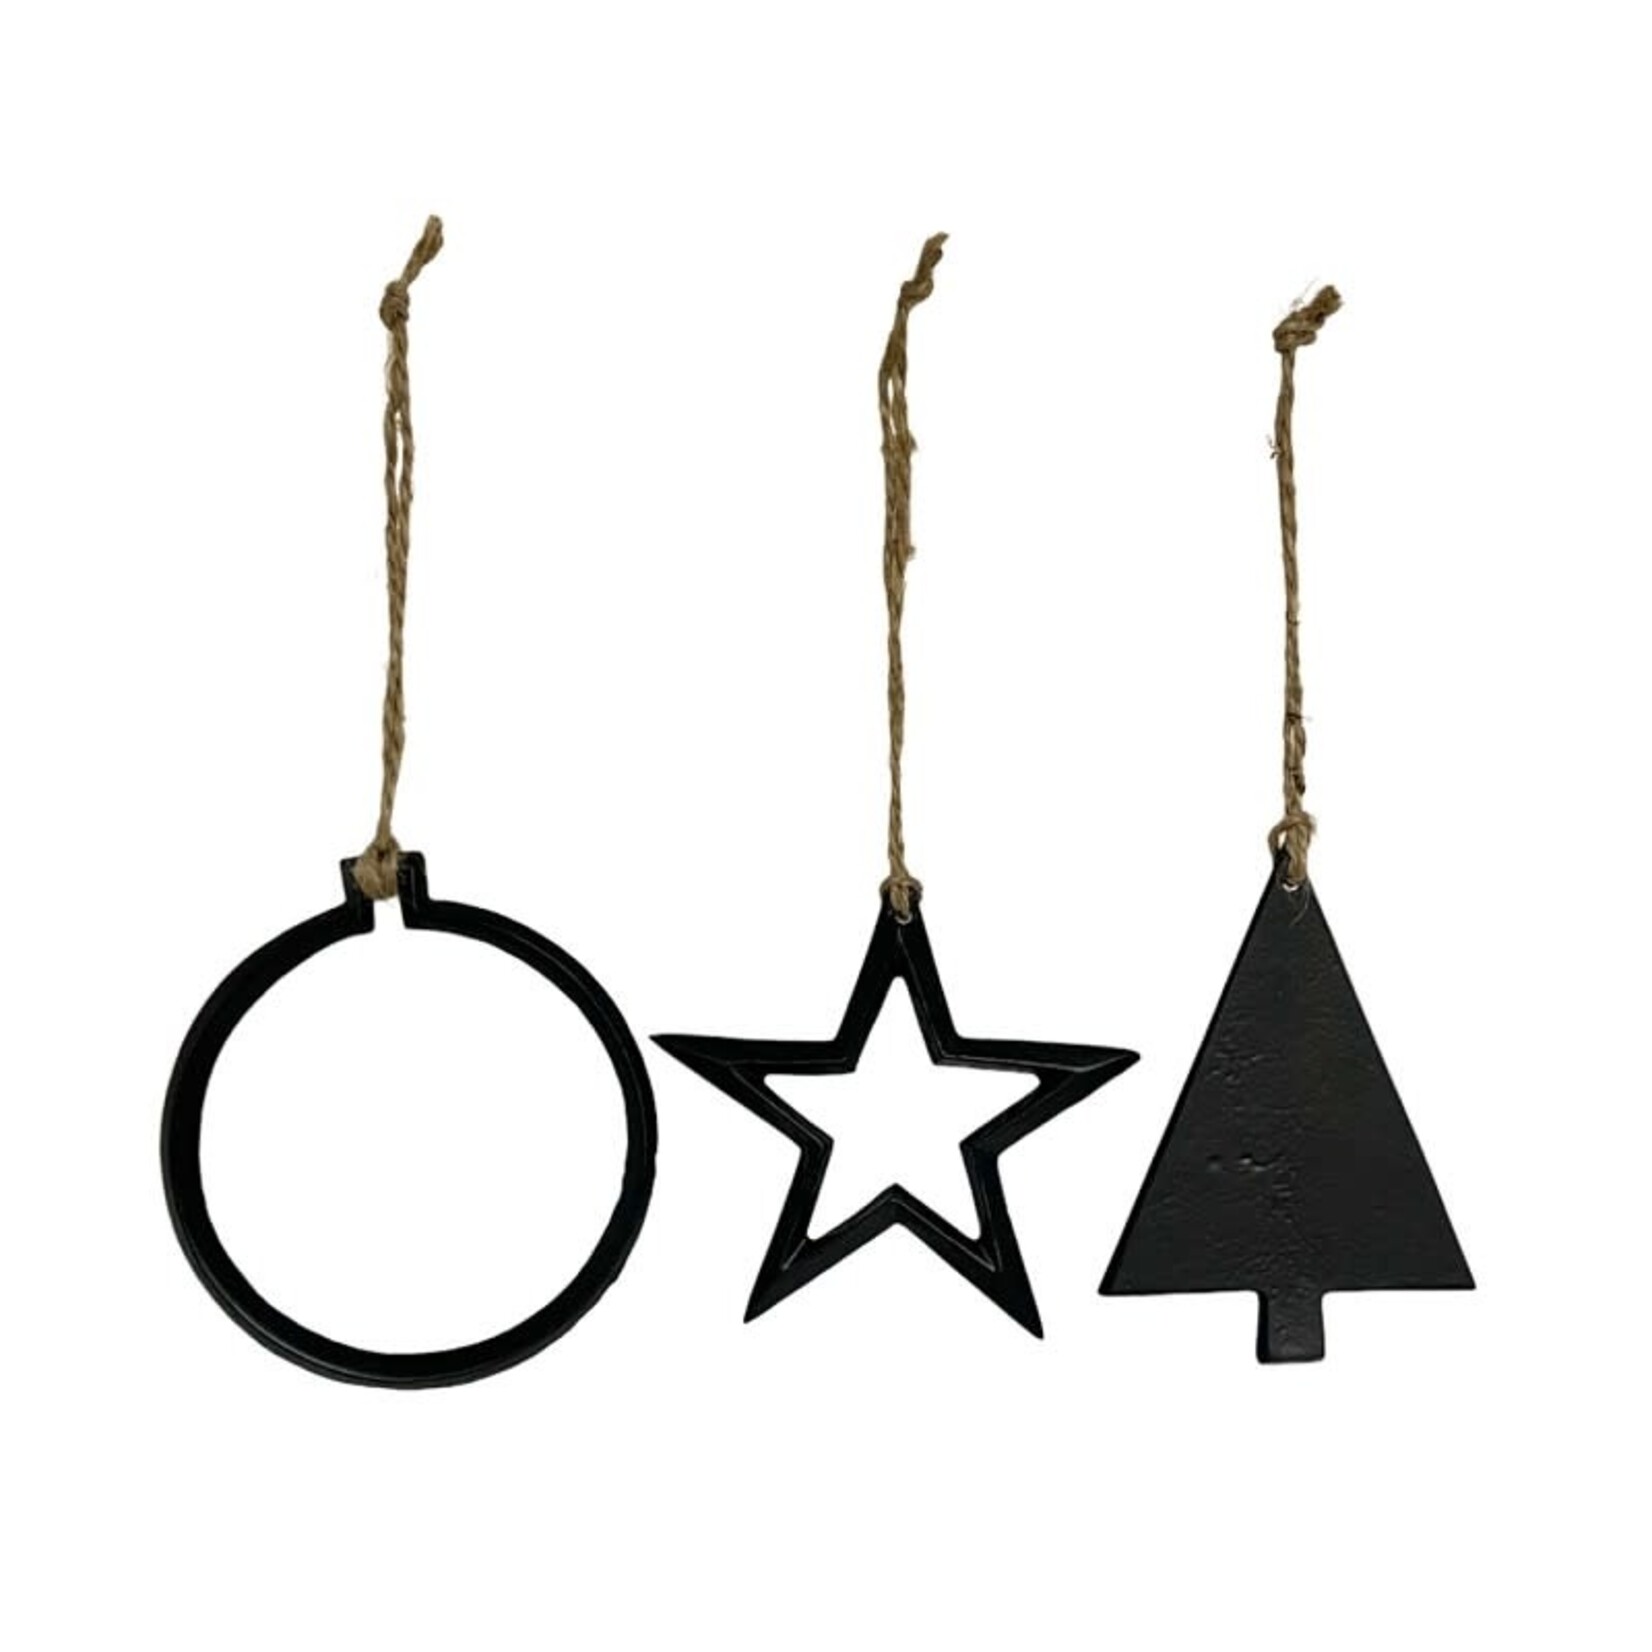 Home Society Ornament Nordic kerstbal